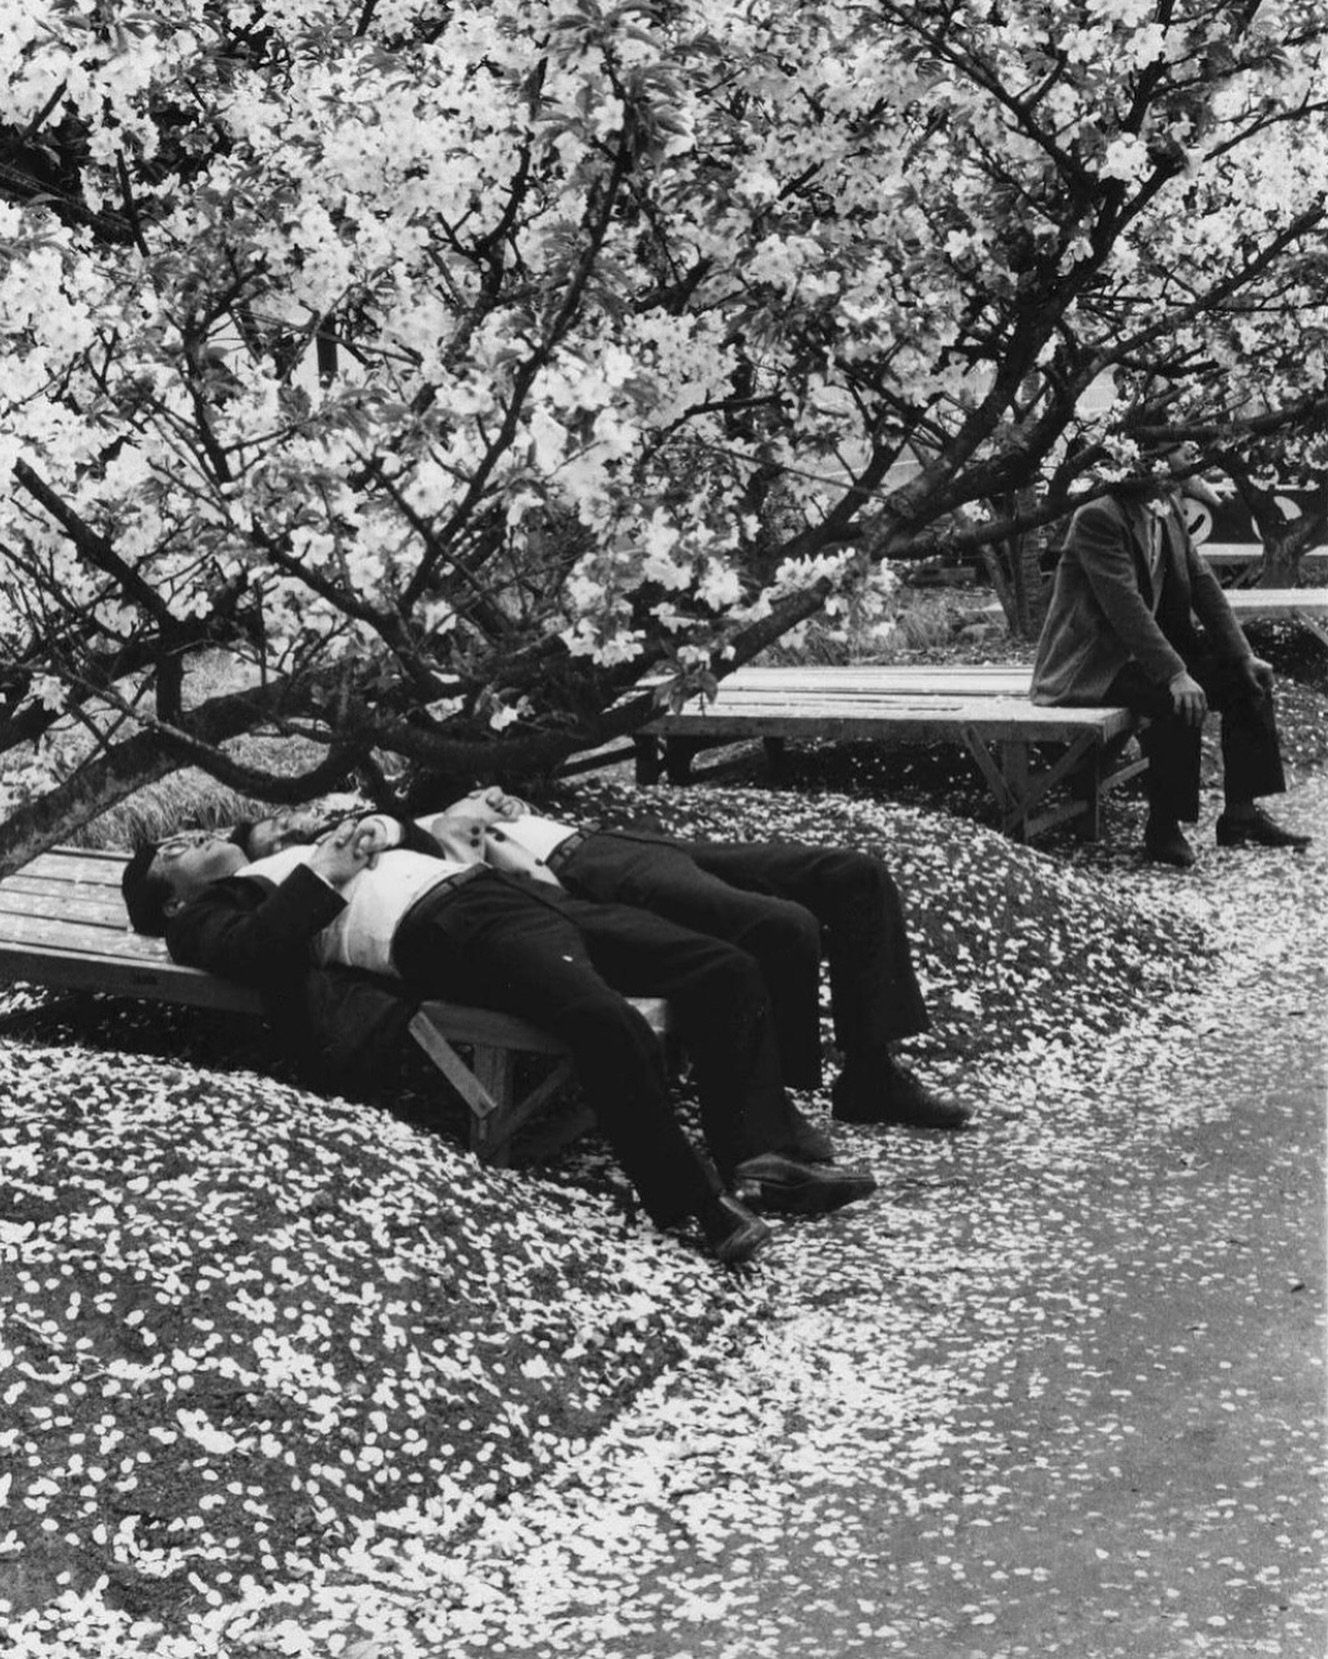 Muse for your Saturday soak.

Seiryu Inoue (1931-1988) - Men lying under cherry blossoms, from the photo book &lsquo;Kyo no miyako&rsquo; 1960/1970

@le_jardin_robo